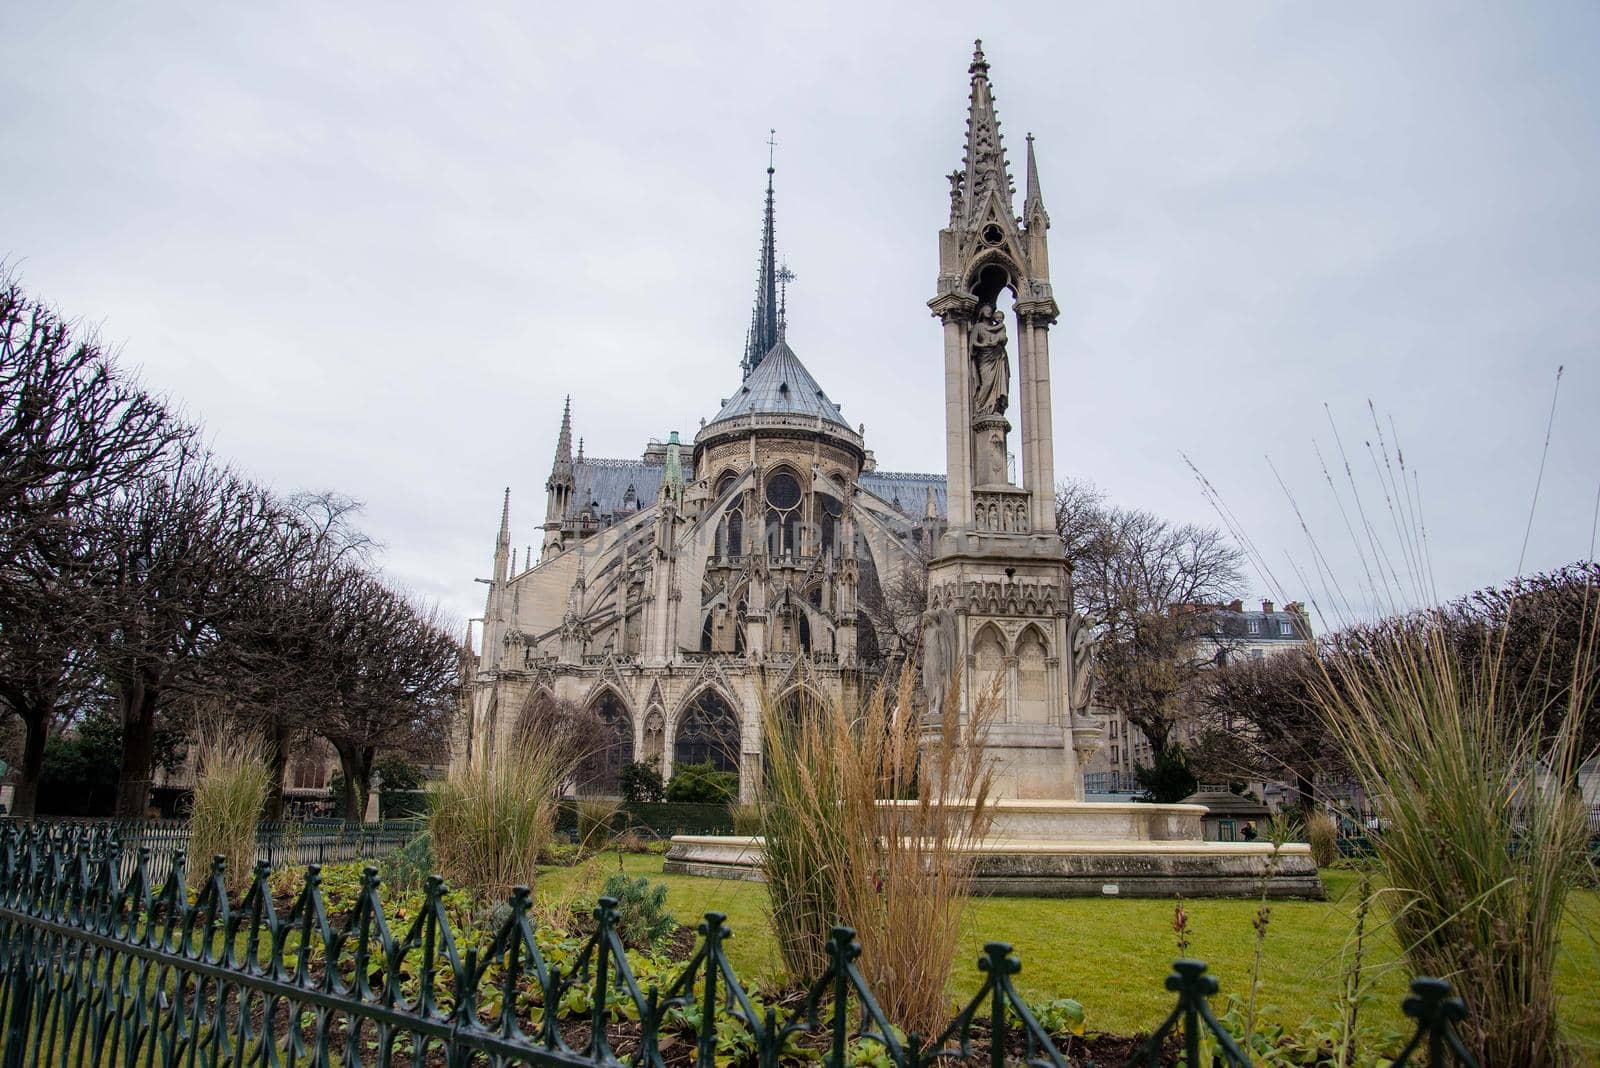 Paris, France - February 3, 2017: Peering over gothic fence at the world famous Notre Dame de Paris. Frontal view